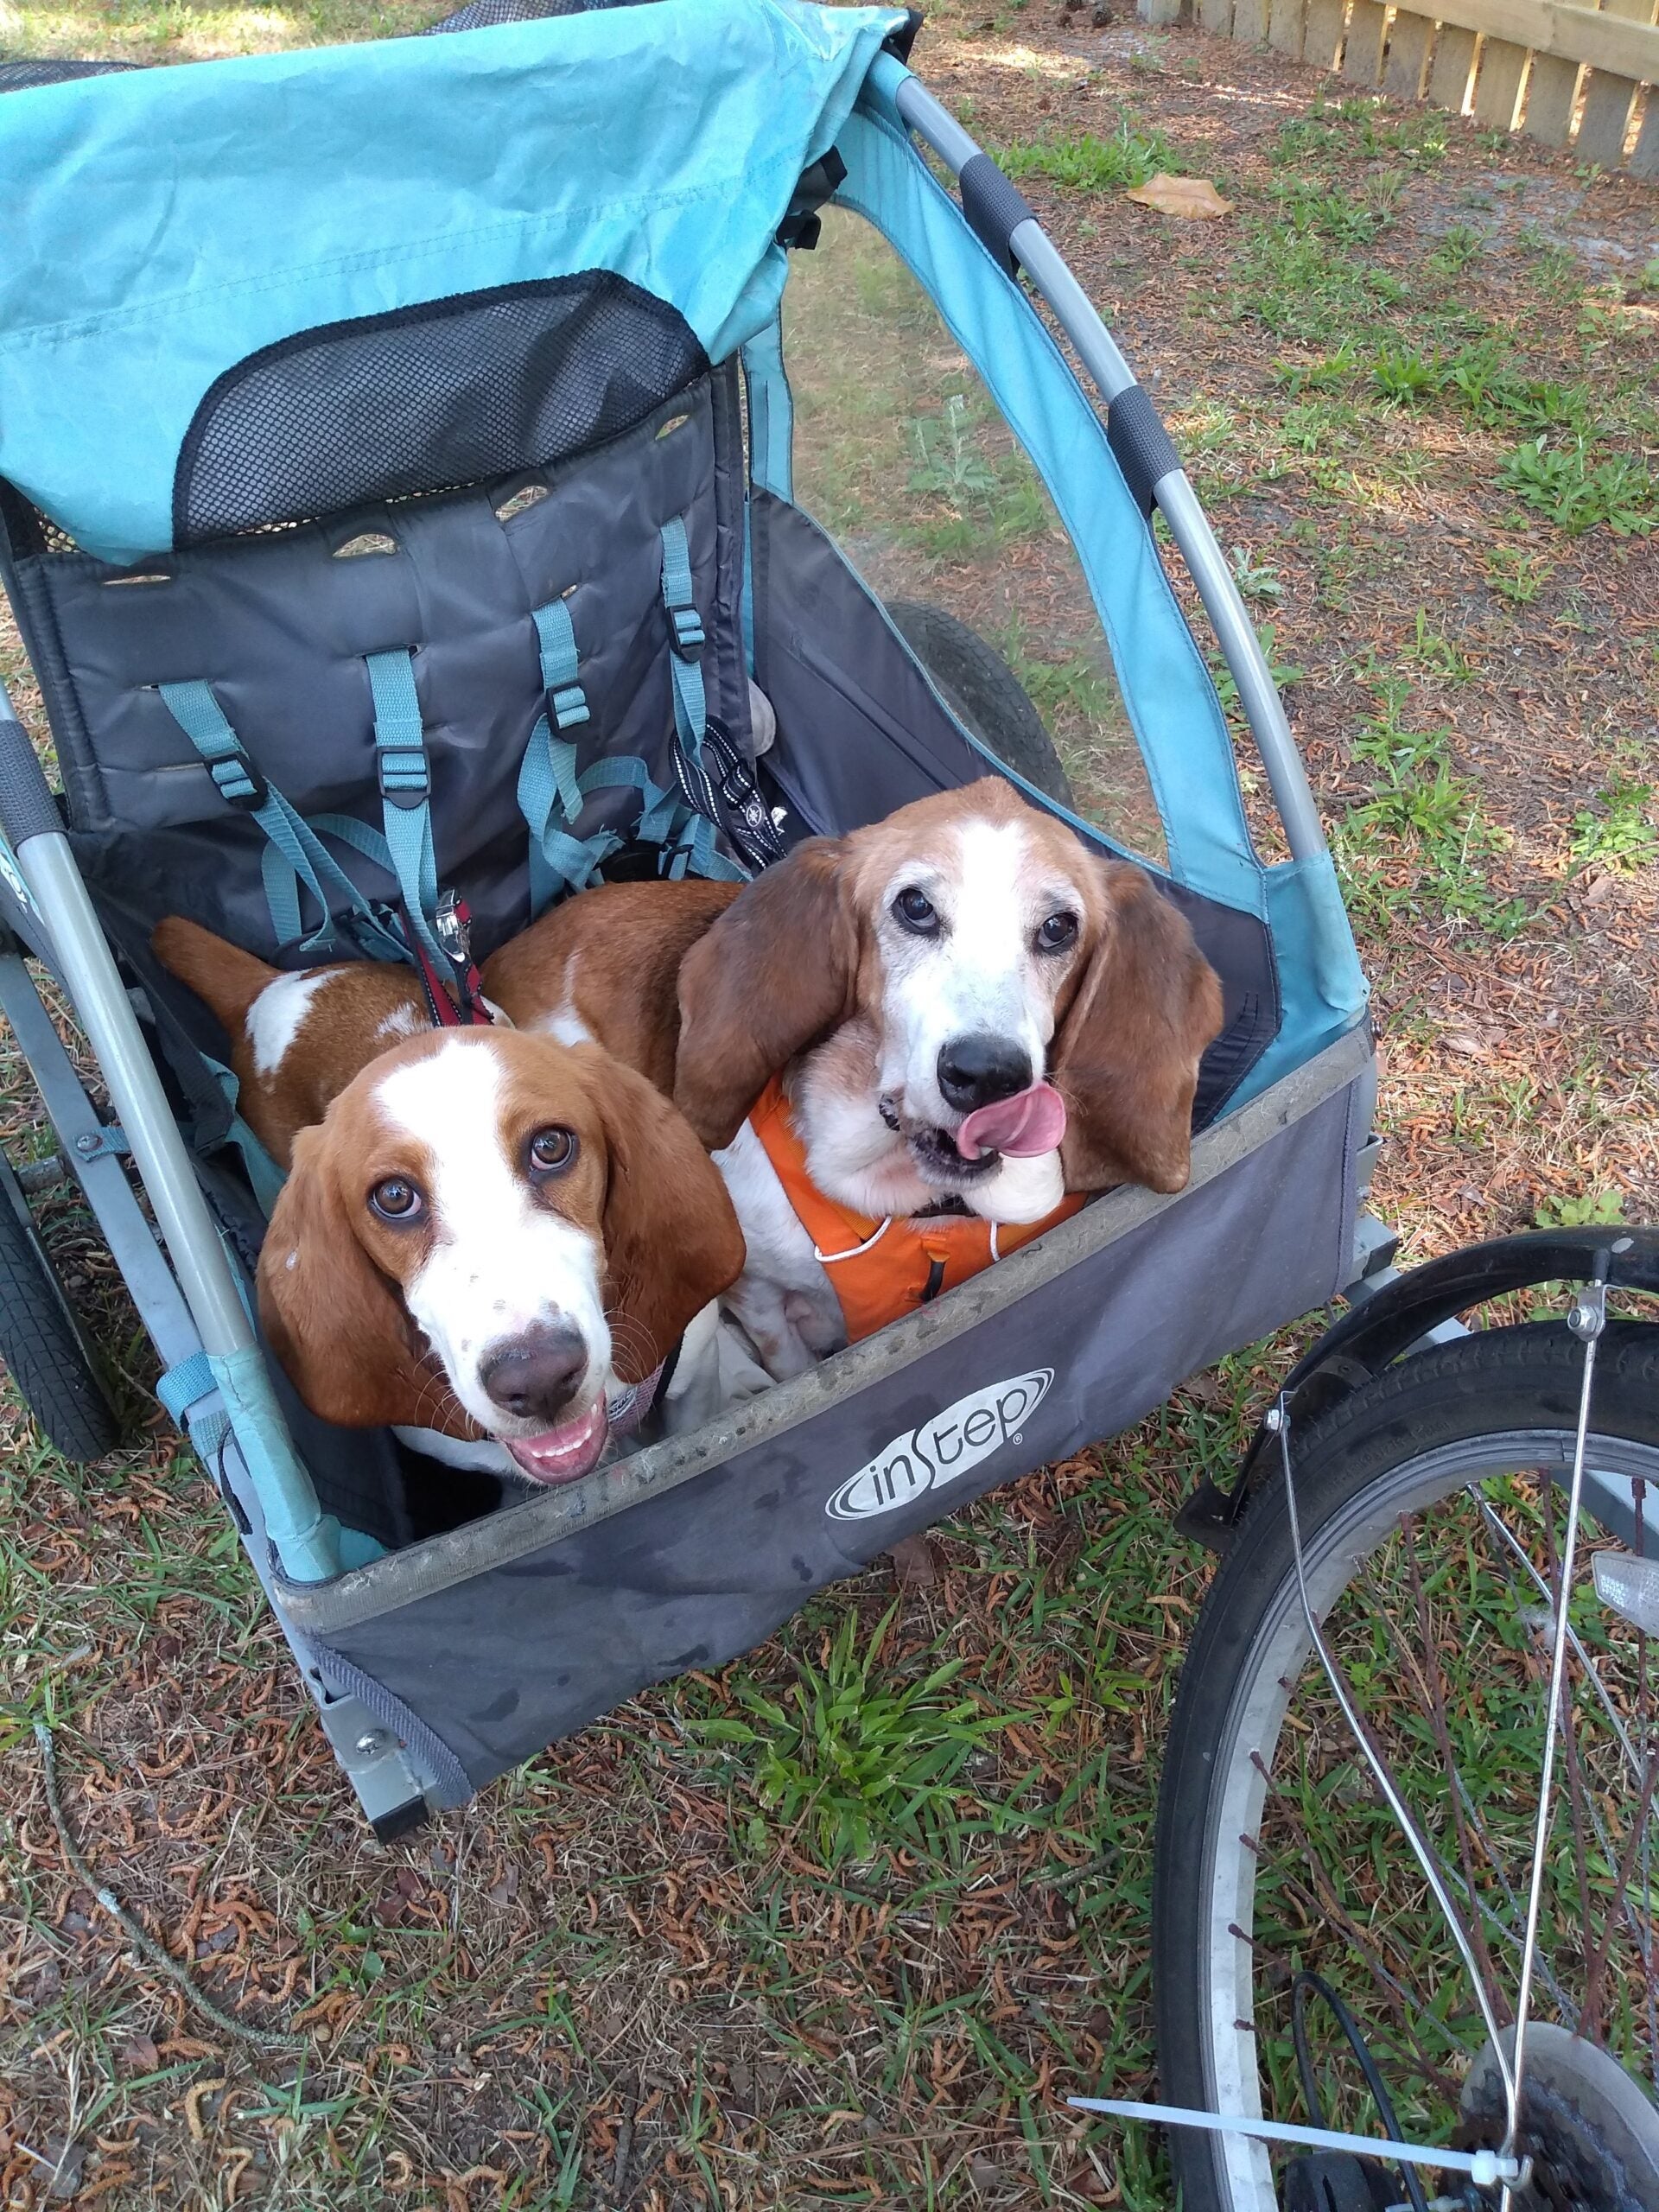 2 bassett hound dogs sitting in trailer attached to bicycle